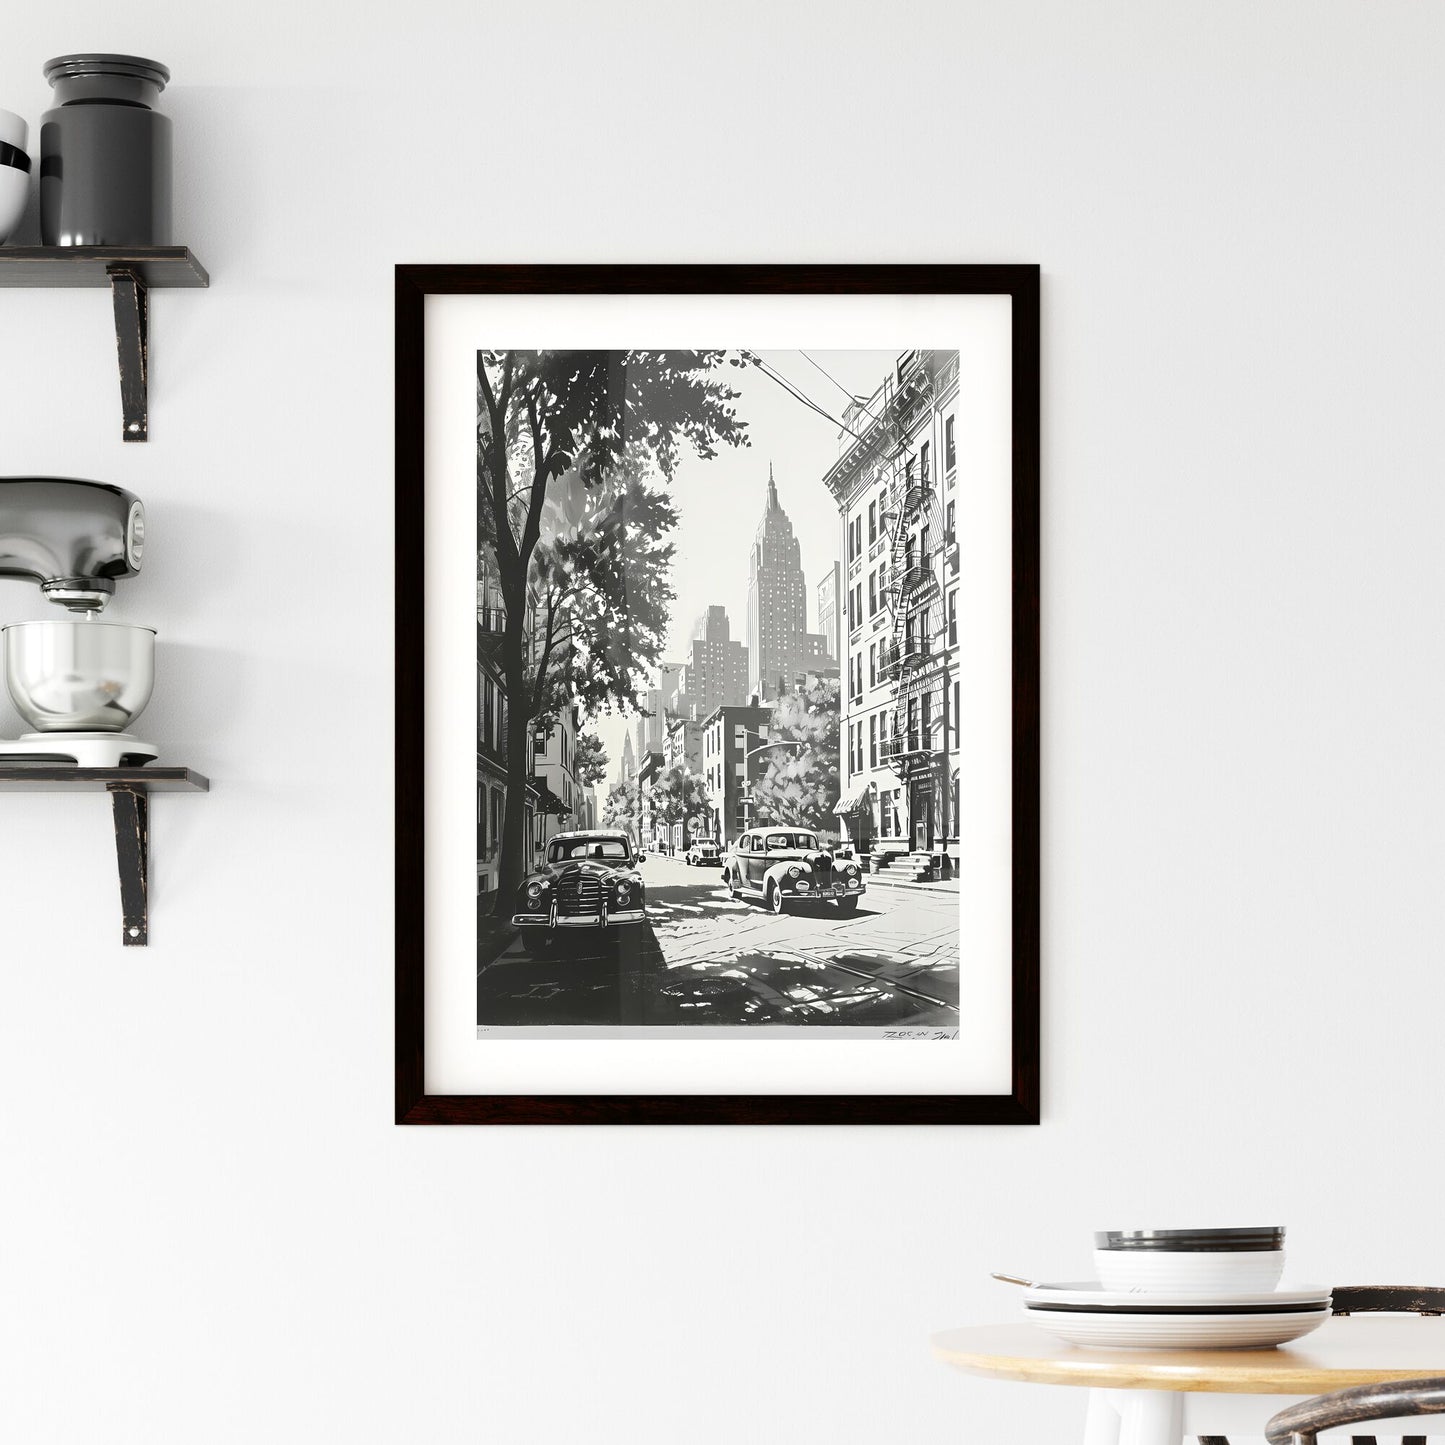 A Poster of art deco minimalism - A Black And White Picture Of A Street With Cars And Buildings Default Title